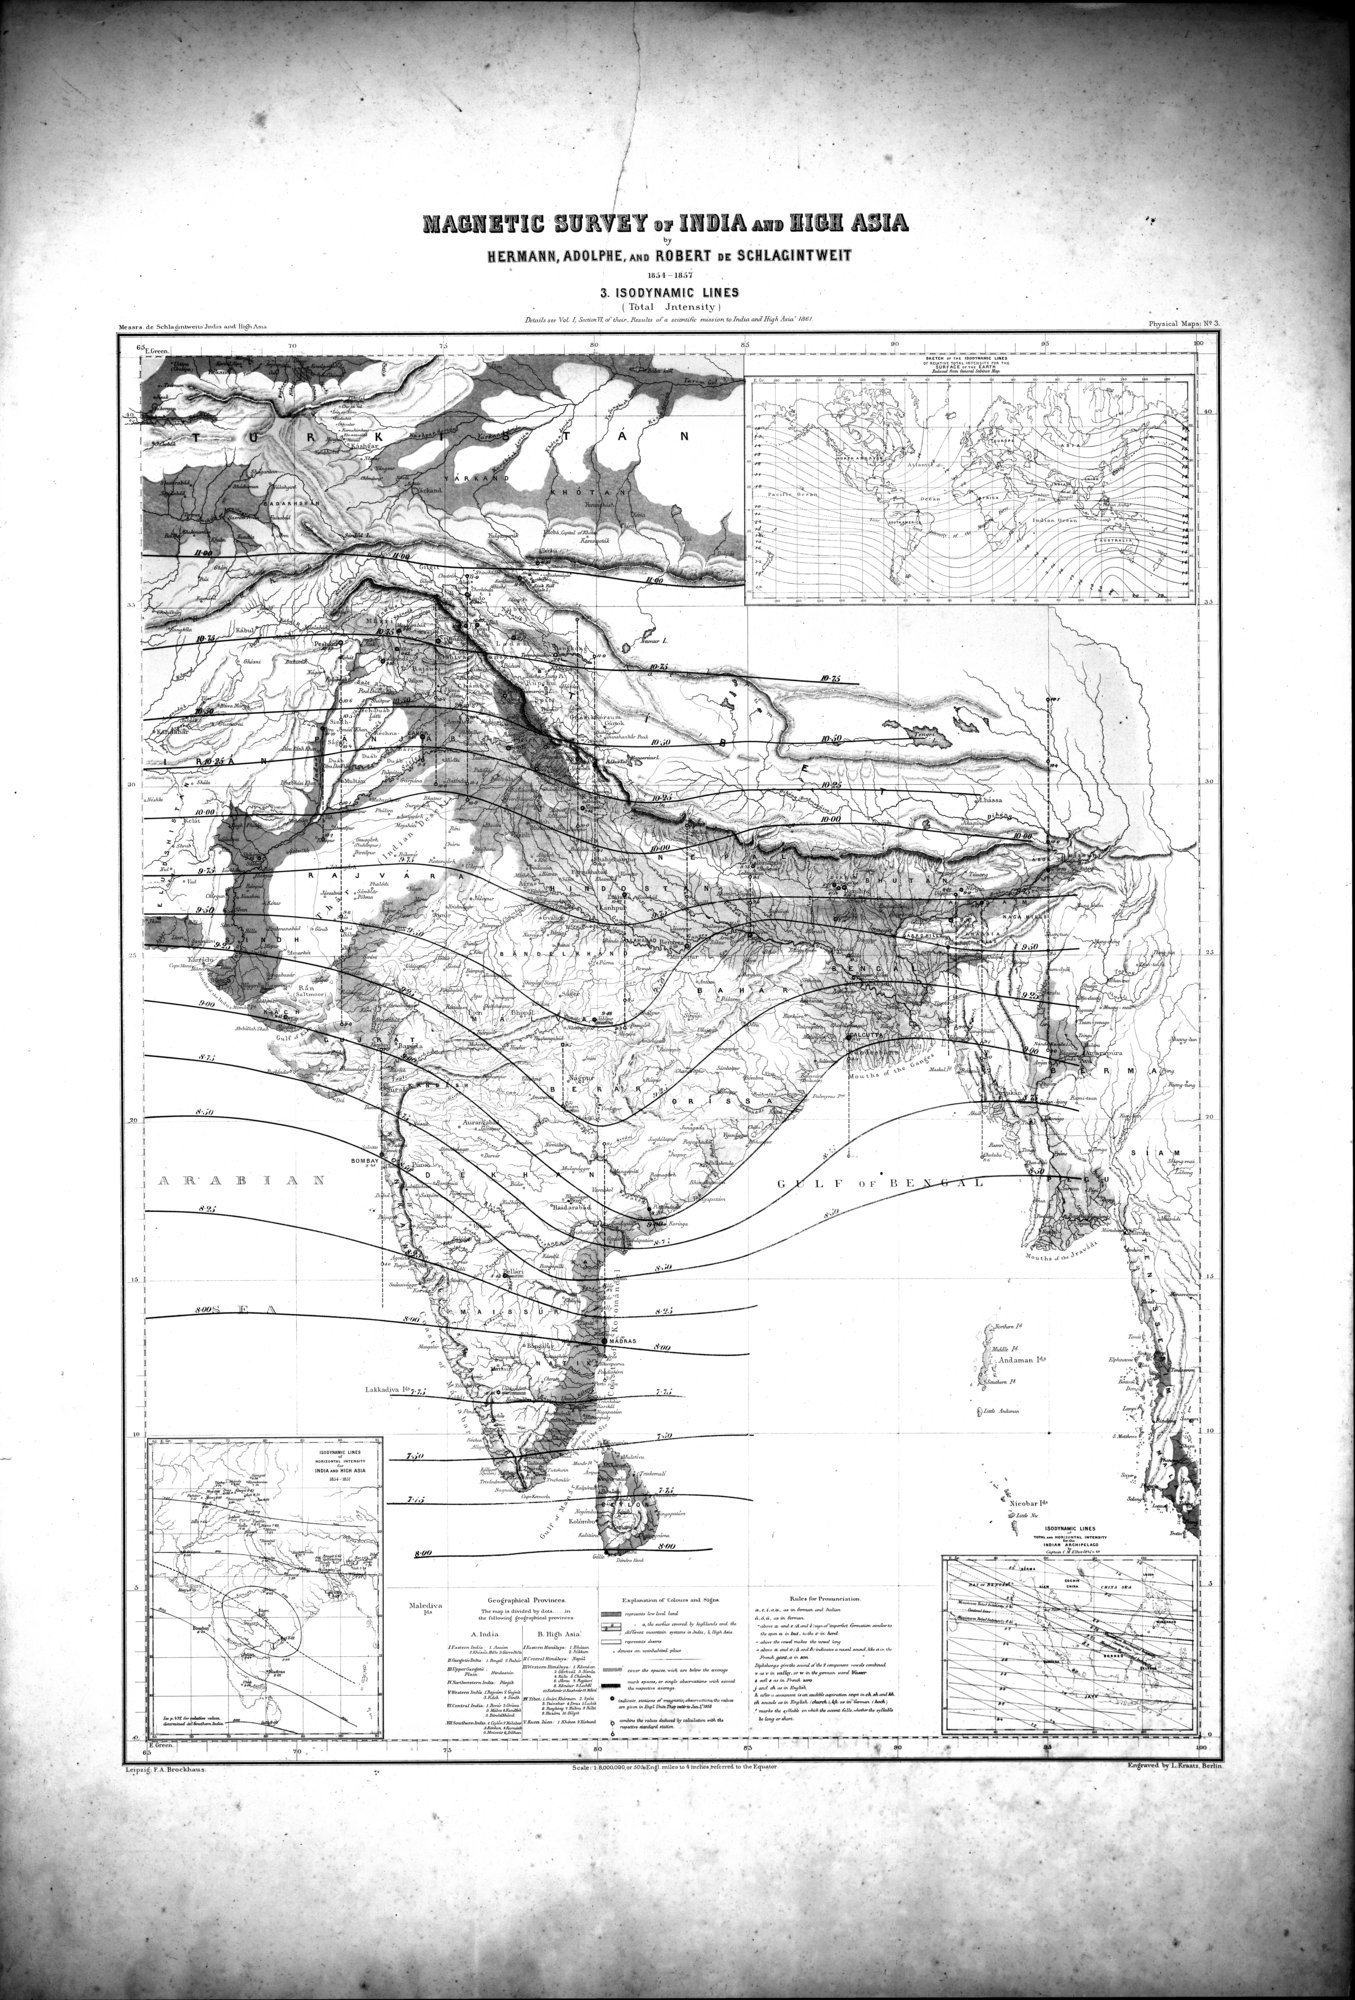 Results of a Scientific Mission to India and High Asia : vol.5 / Page 21 (Grayscale High Resolution Image)